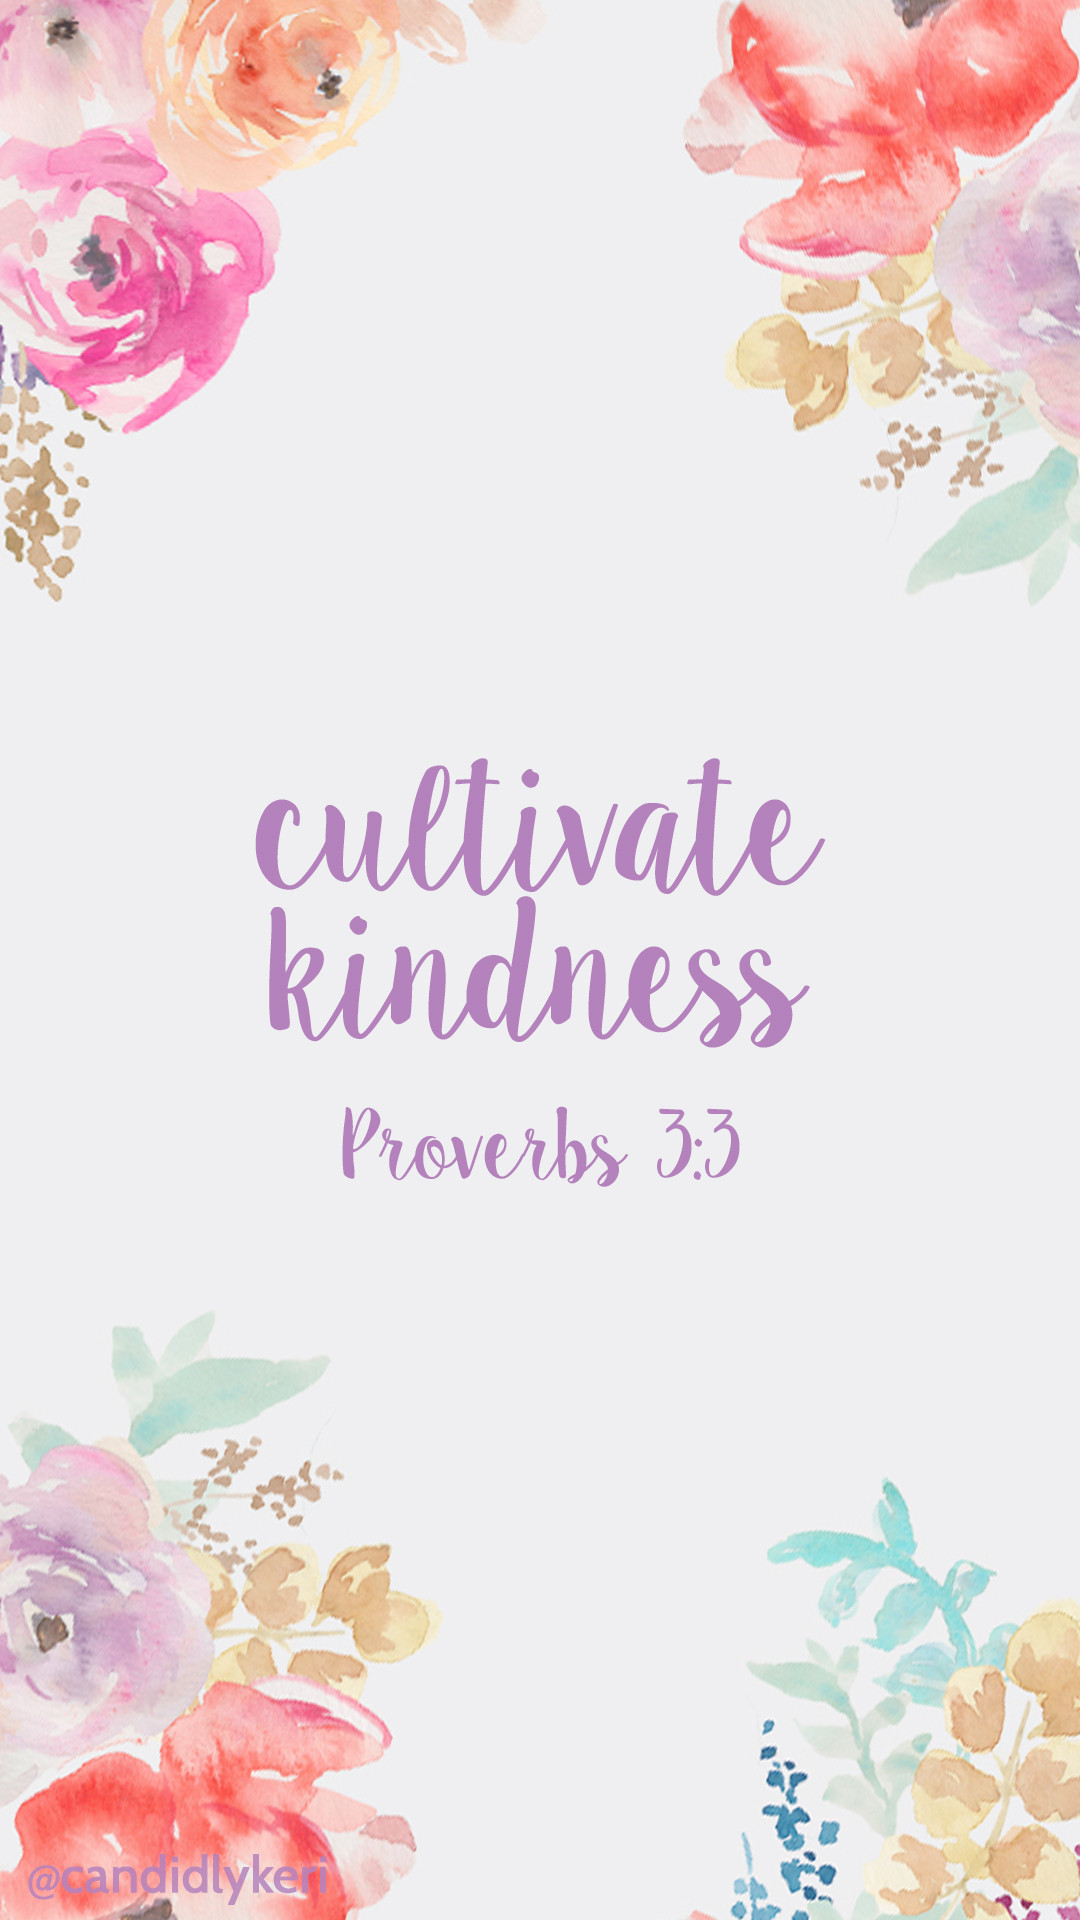 Bible Verse Wallpapers (51+ images)